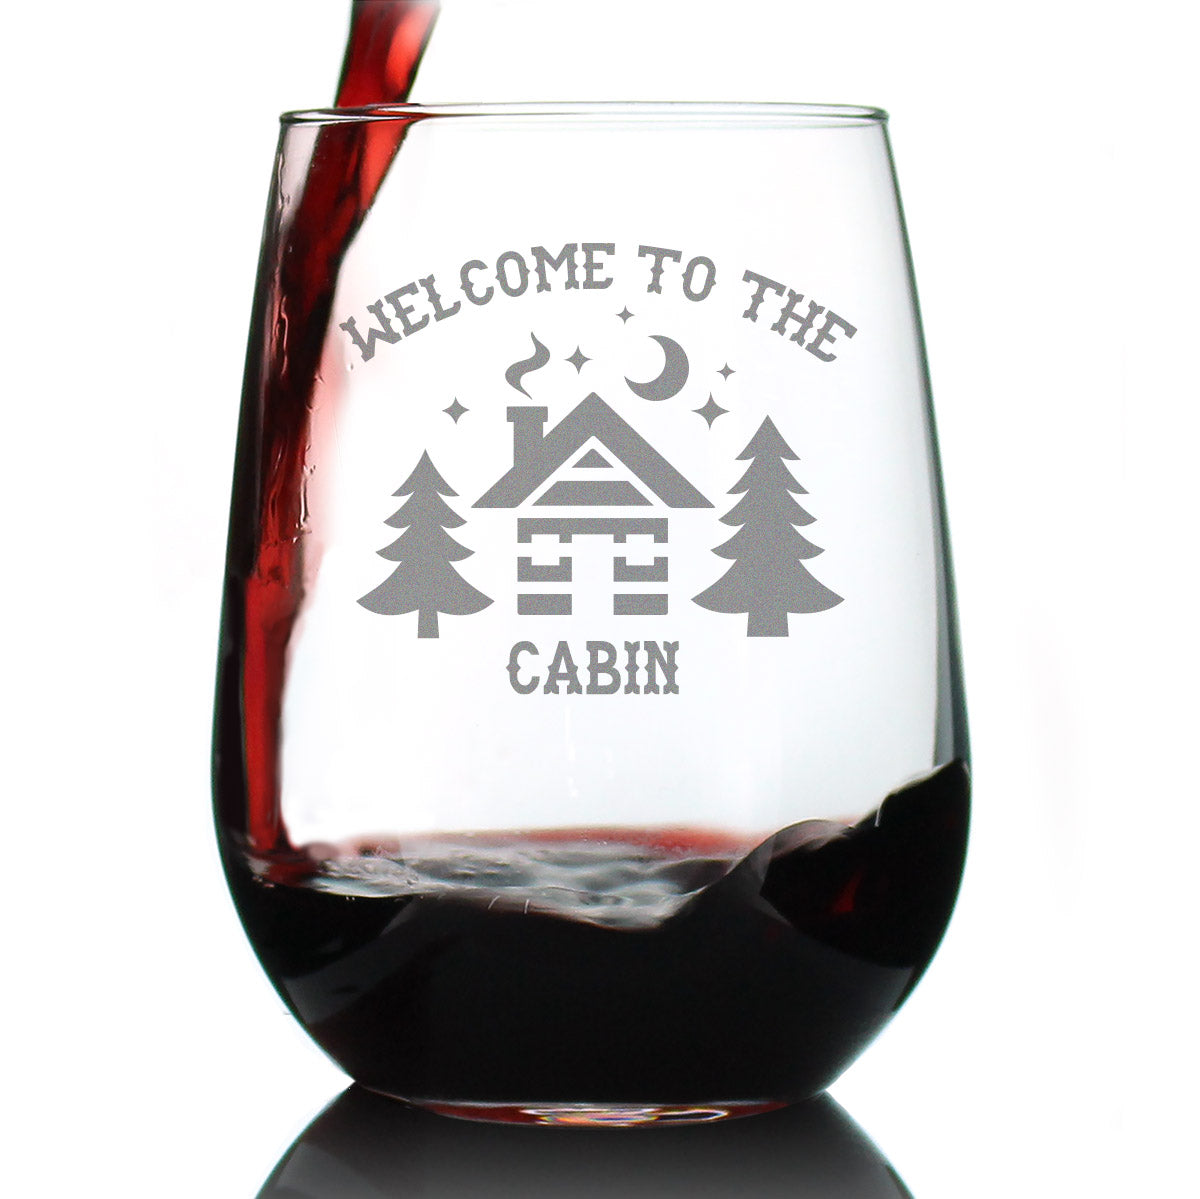 Welcome To The Cabin - Stemless Wine Glass - Rustic Themed Gifts and Cabin Decor Large - 17 Oz Glasses